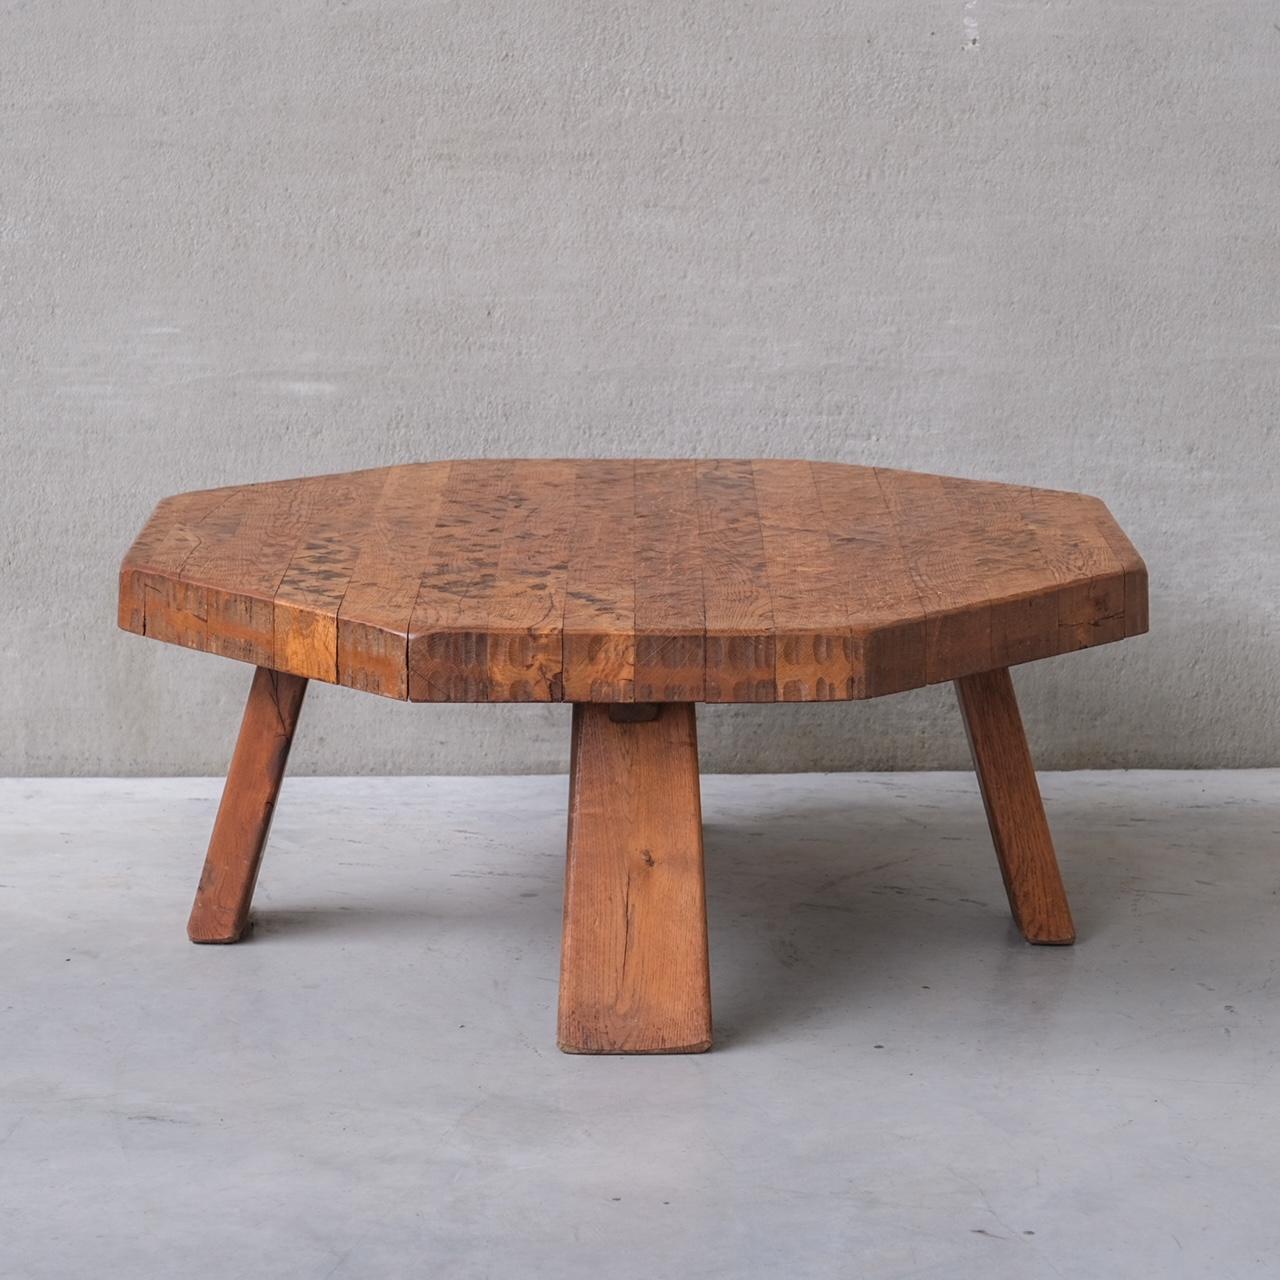 An oak coffee table in octagonal shape. 

Holland, circa 1970s.

Brutalist style. Thick chunky legs. 

Good condition.

Internal Reference: 284/CT010.

Location: Belgium Gallery. 

Dimensions: 110 Diameter x 45 H in cm. 

Delivery: